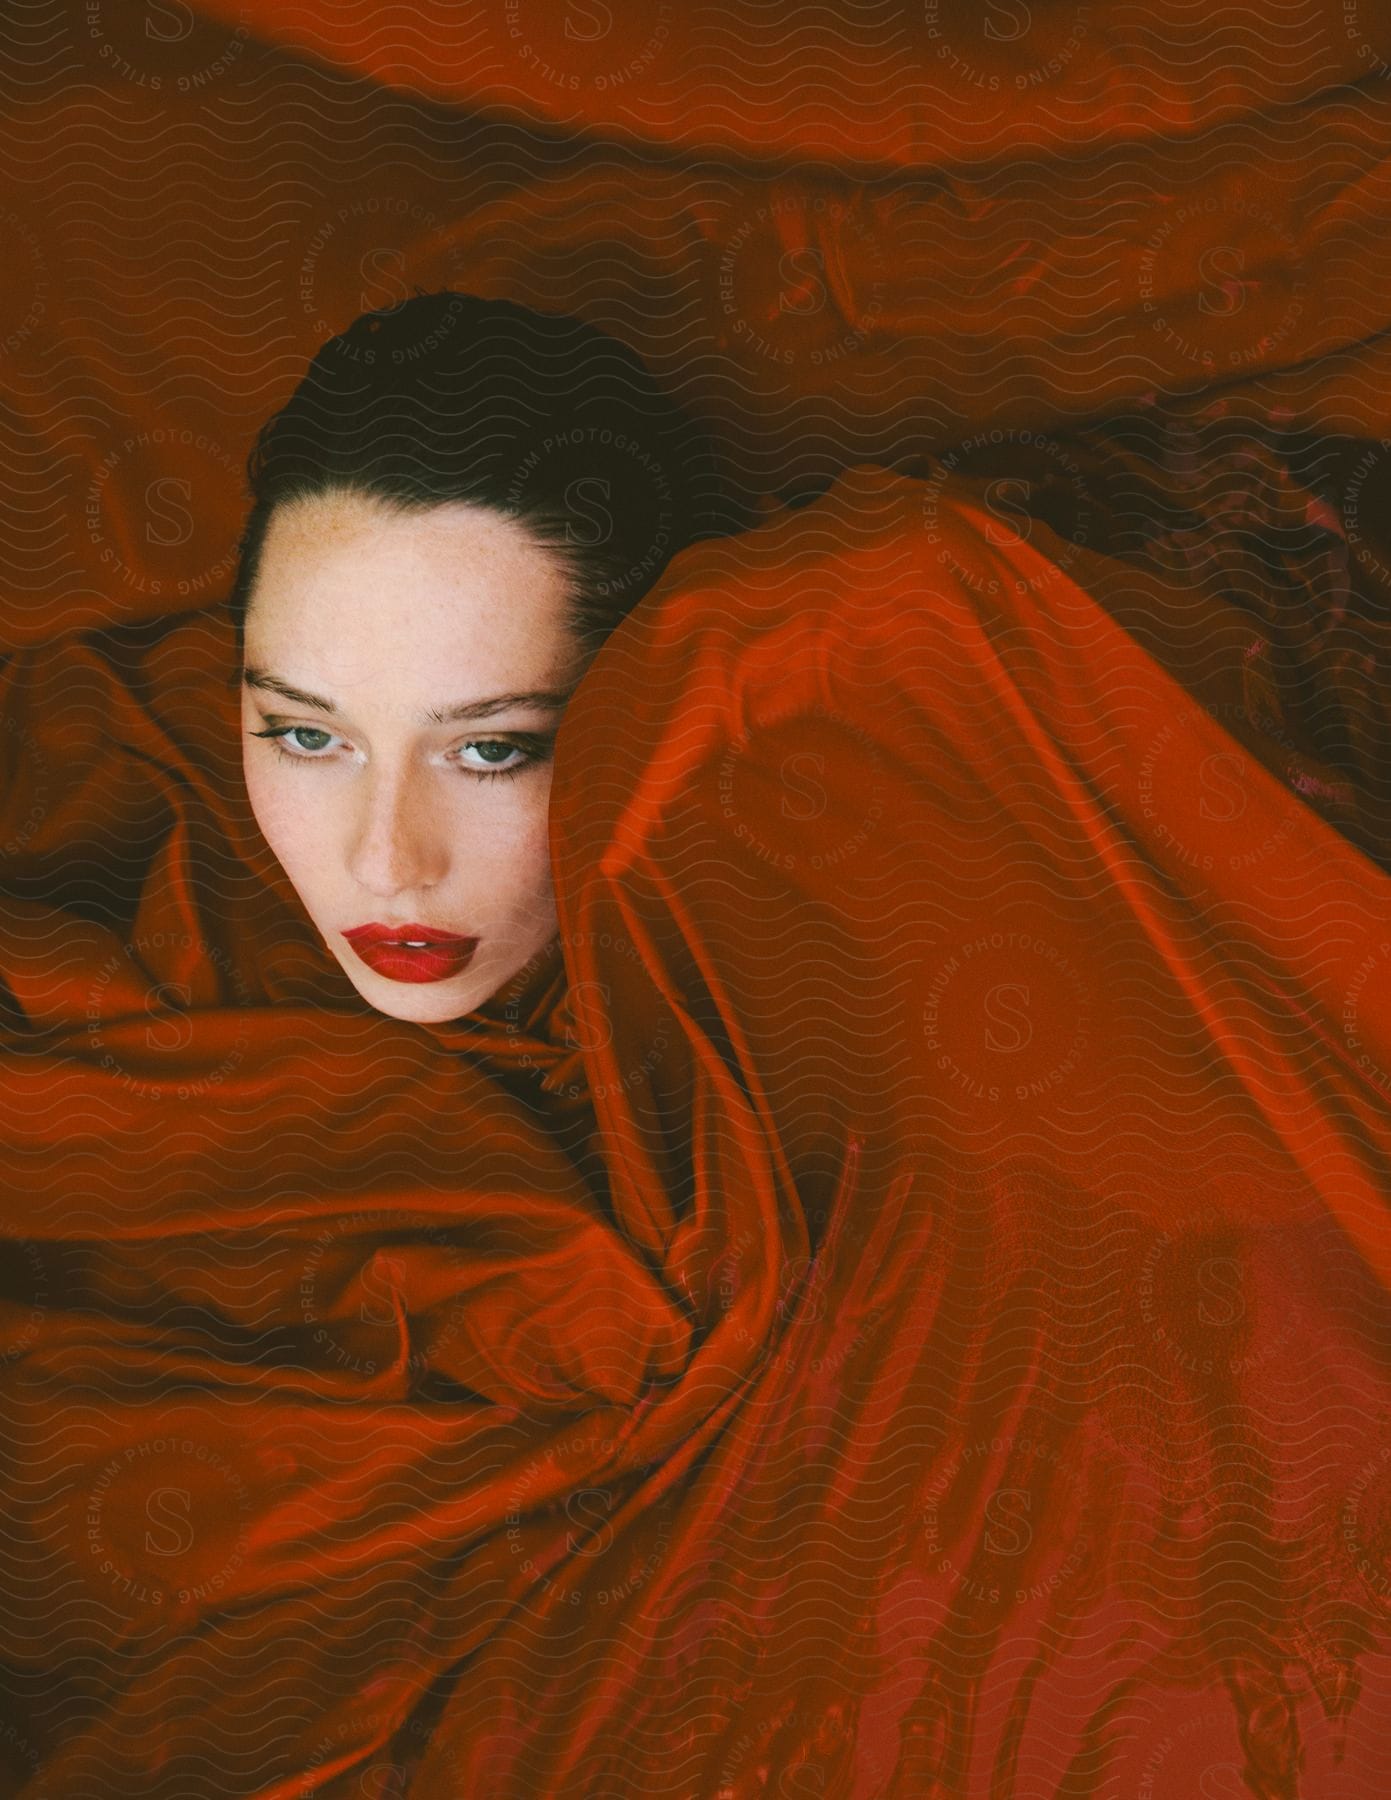 A woman wrapped up in red blankets.